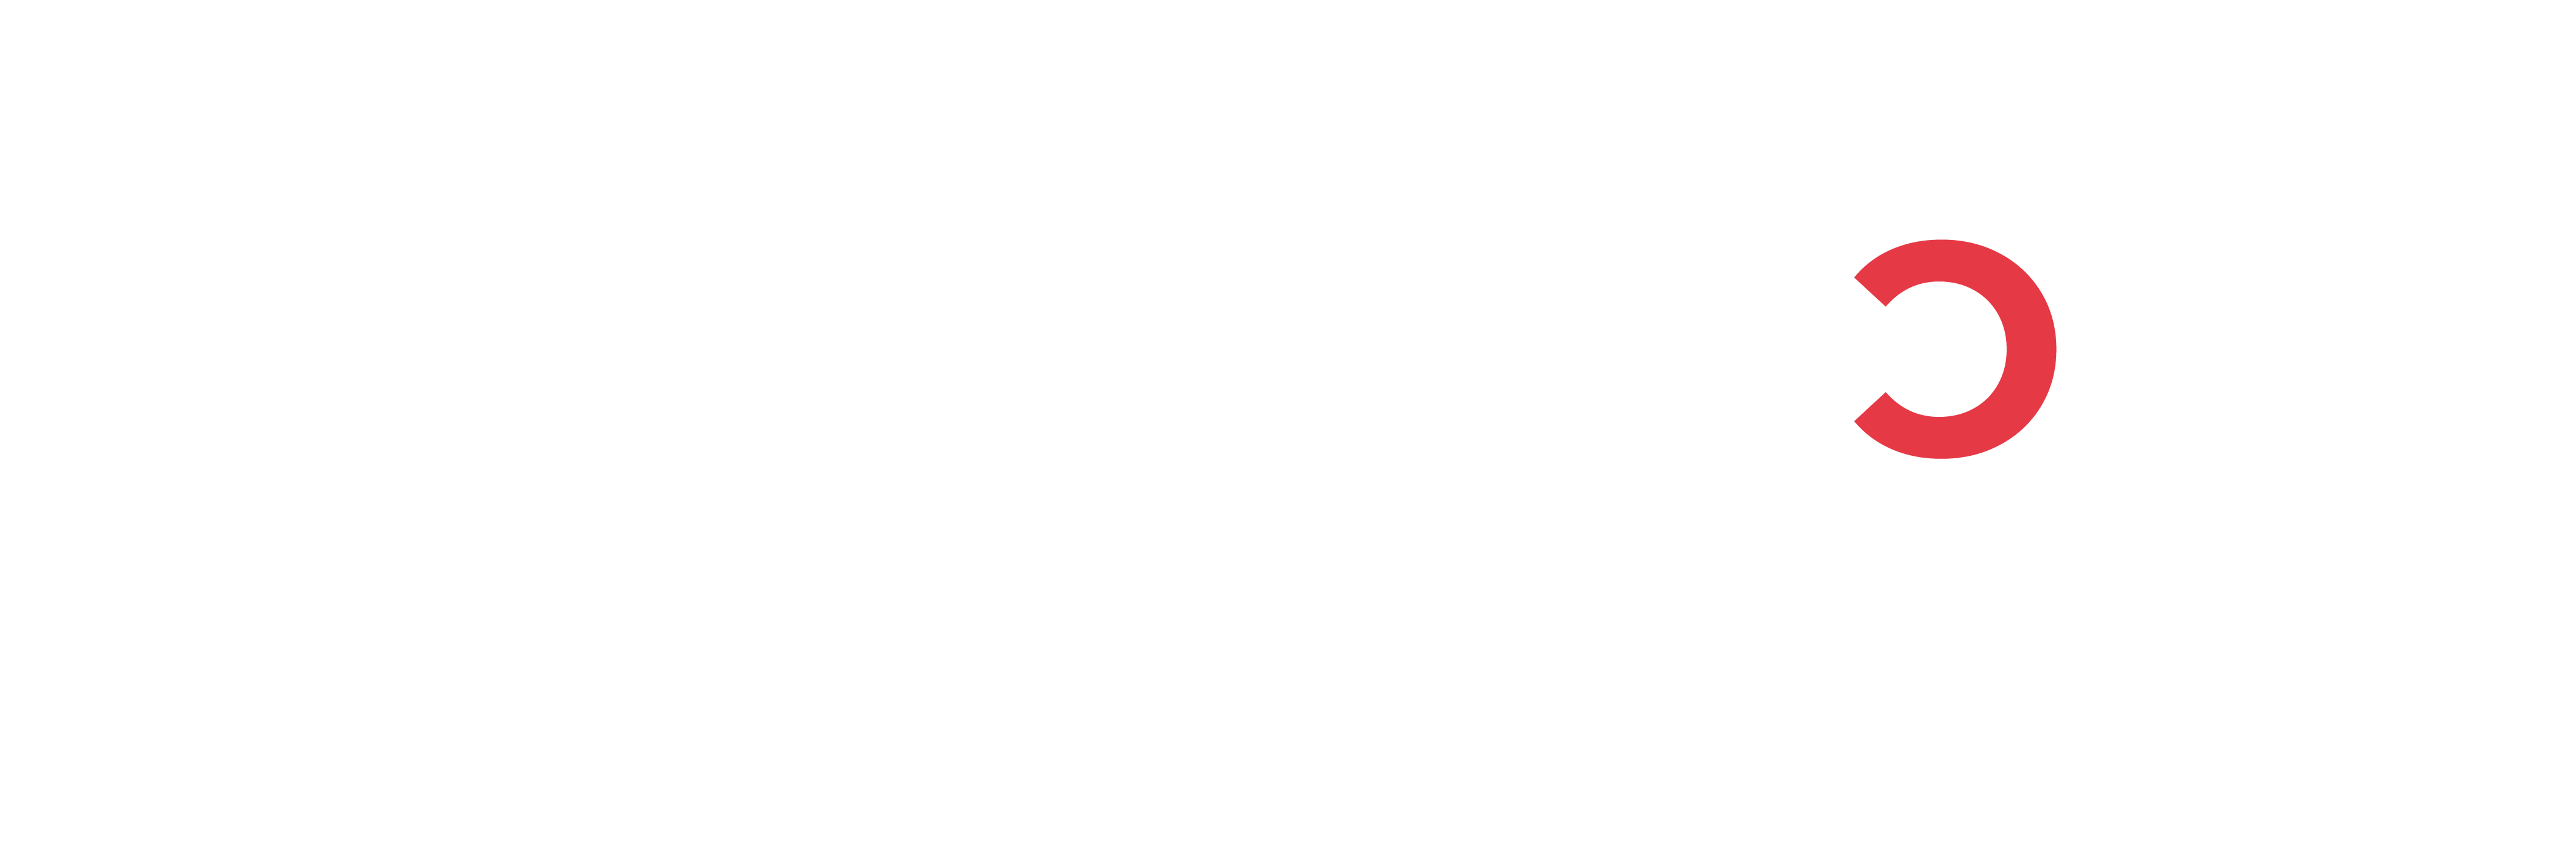 connect-logo-your-link-to-the-internet.png